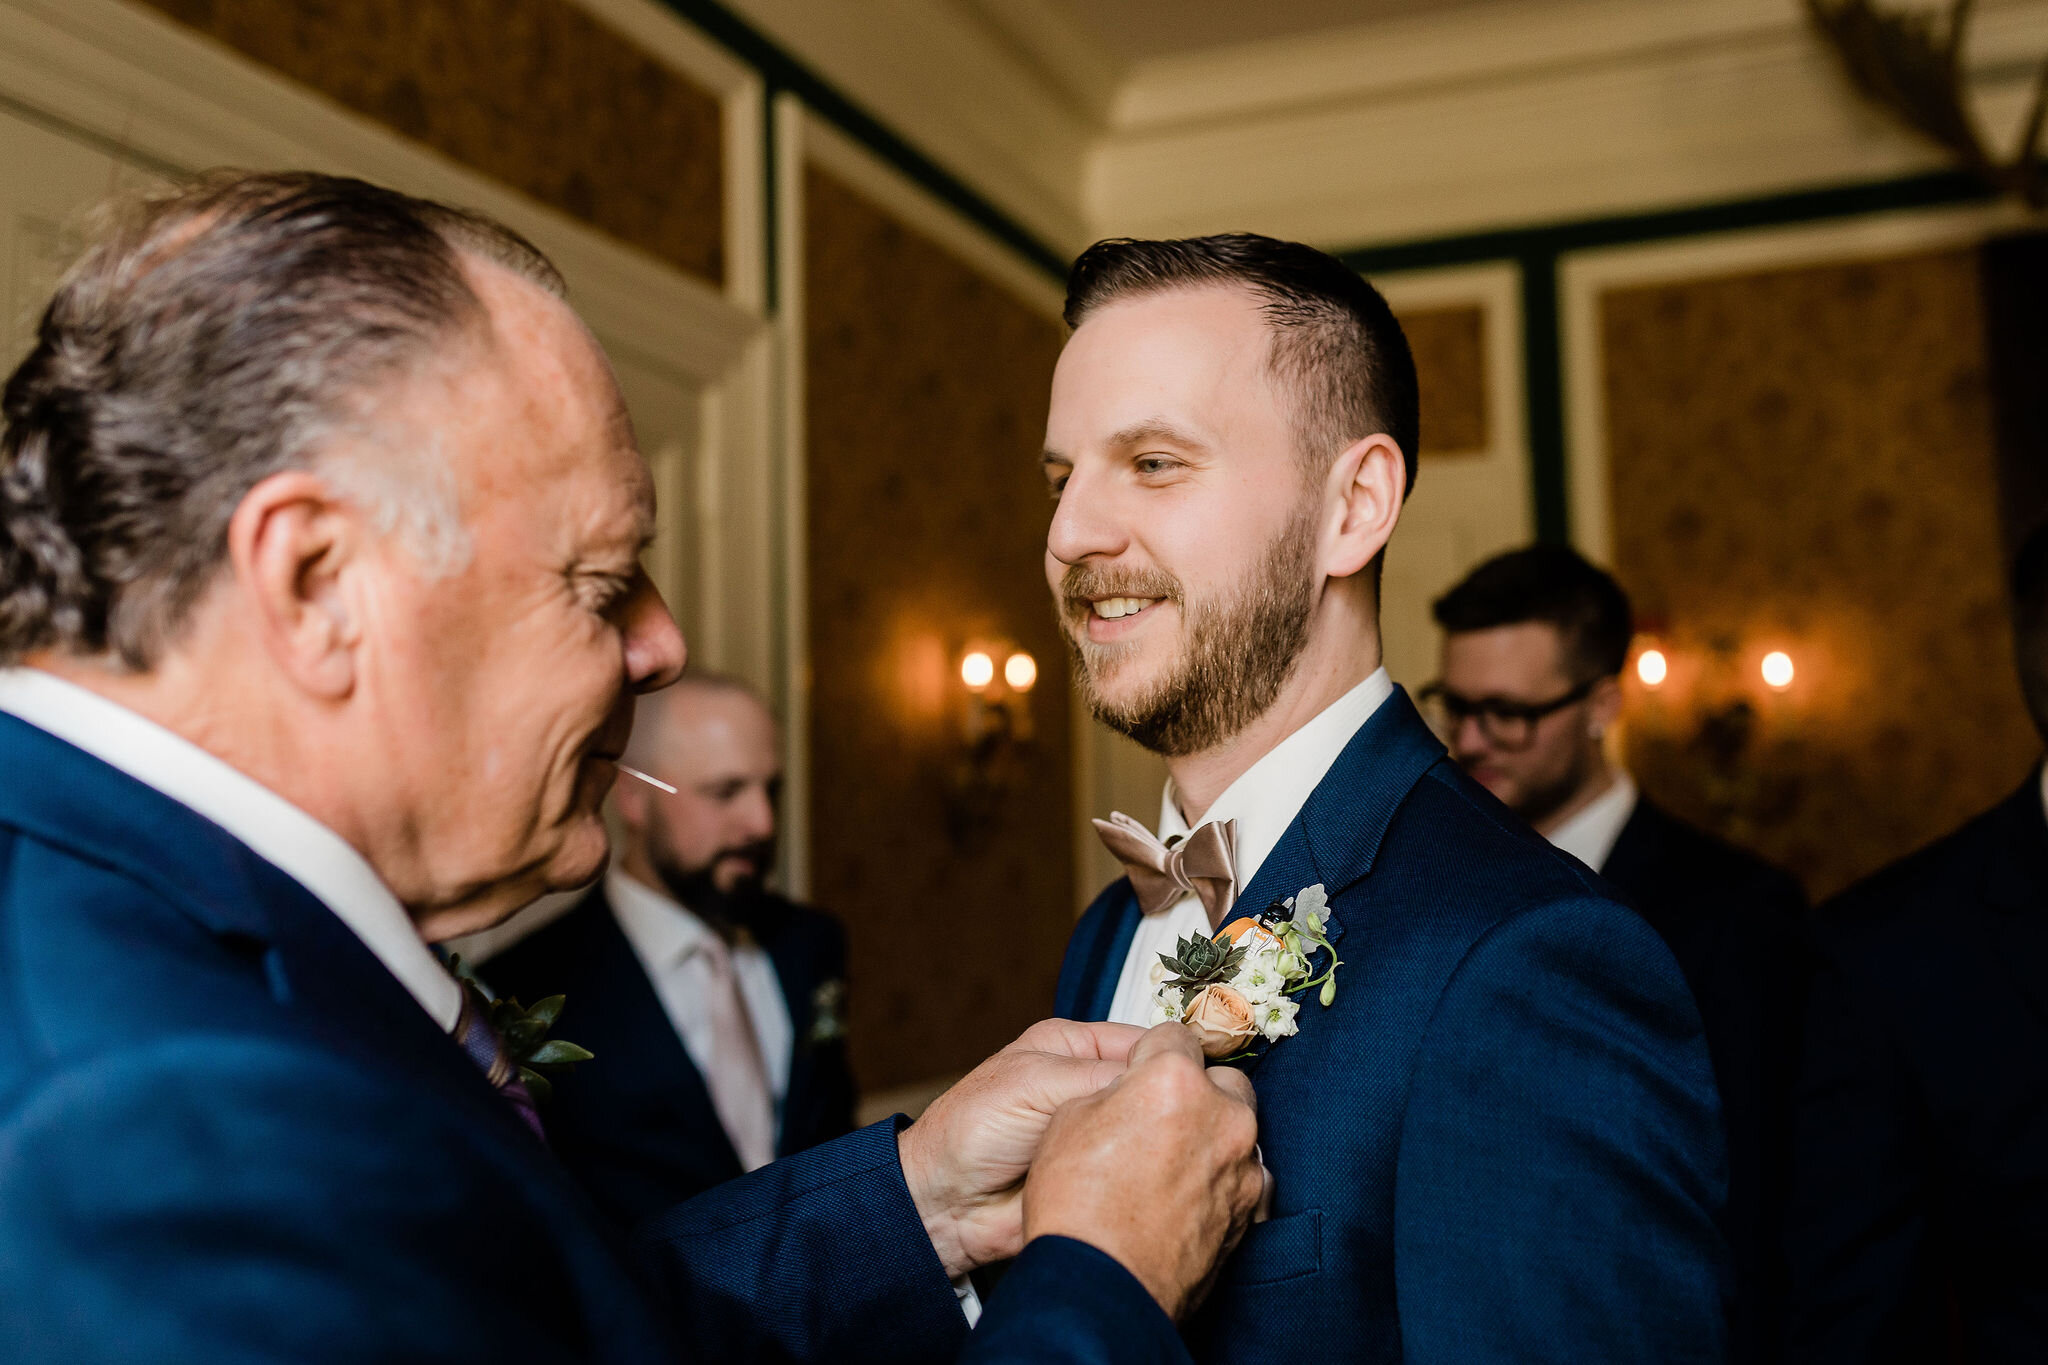 Groom's dad pinning on groom's boutonniere